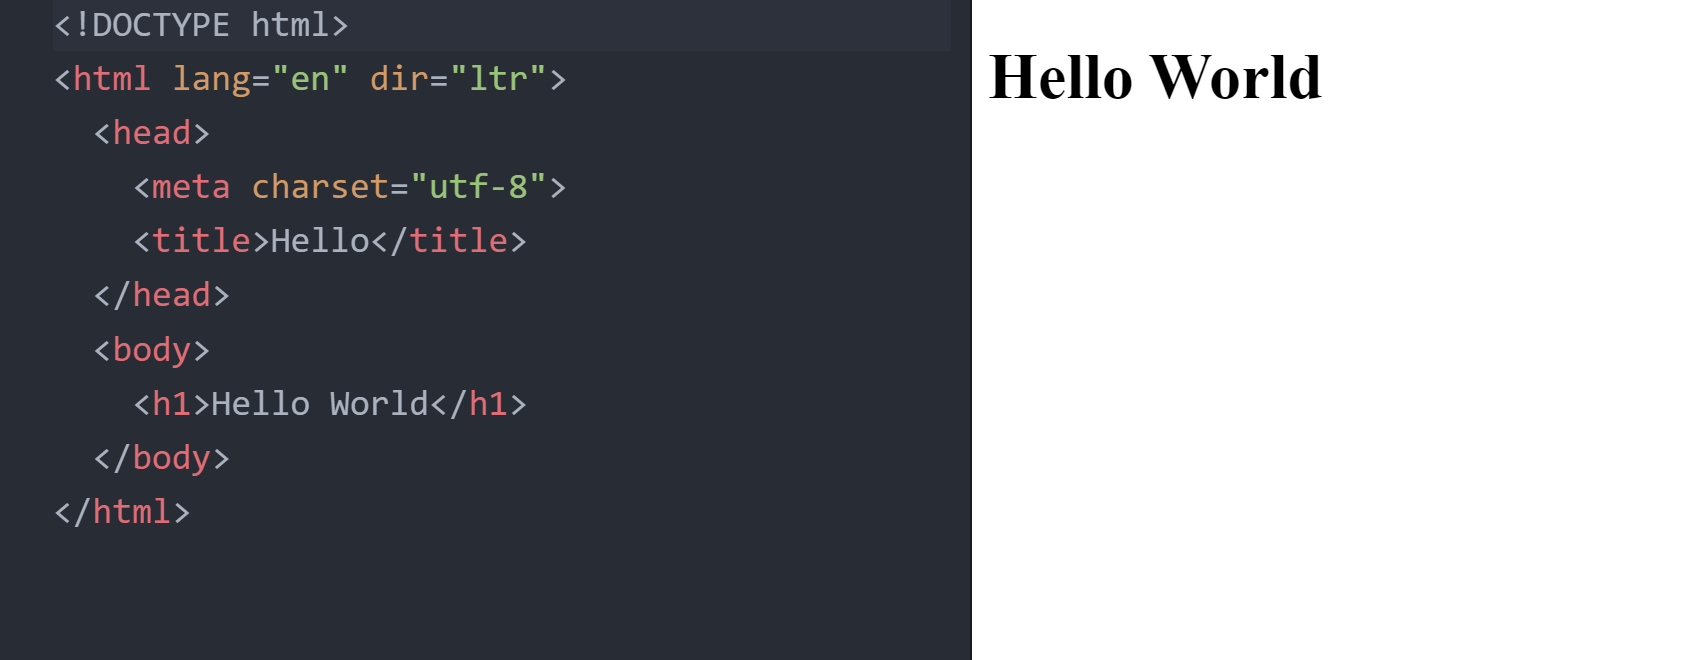 Introduction to HTML: A hello world code